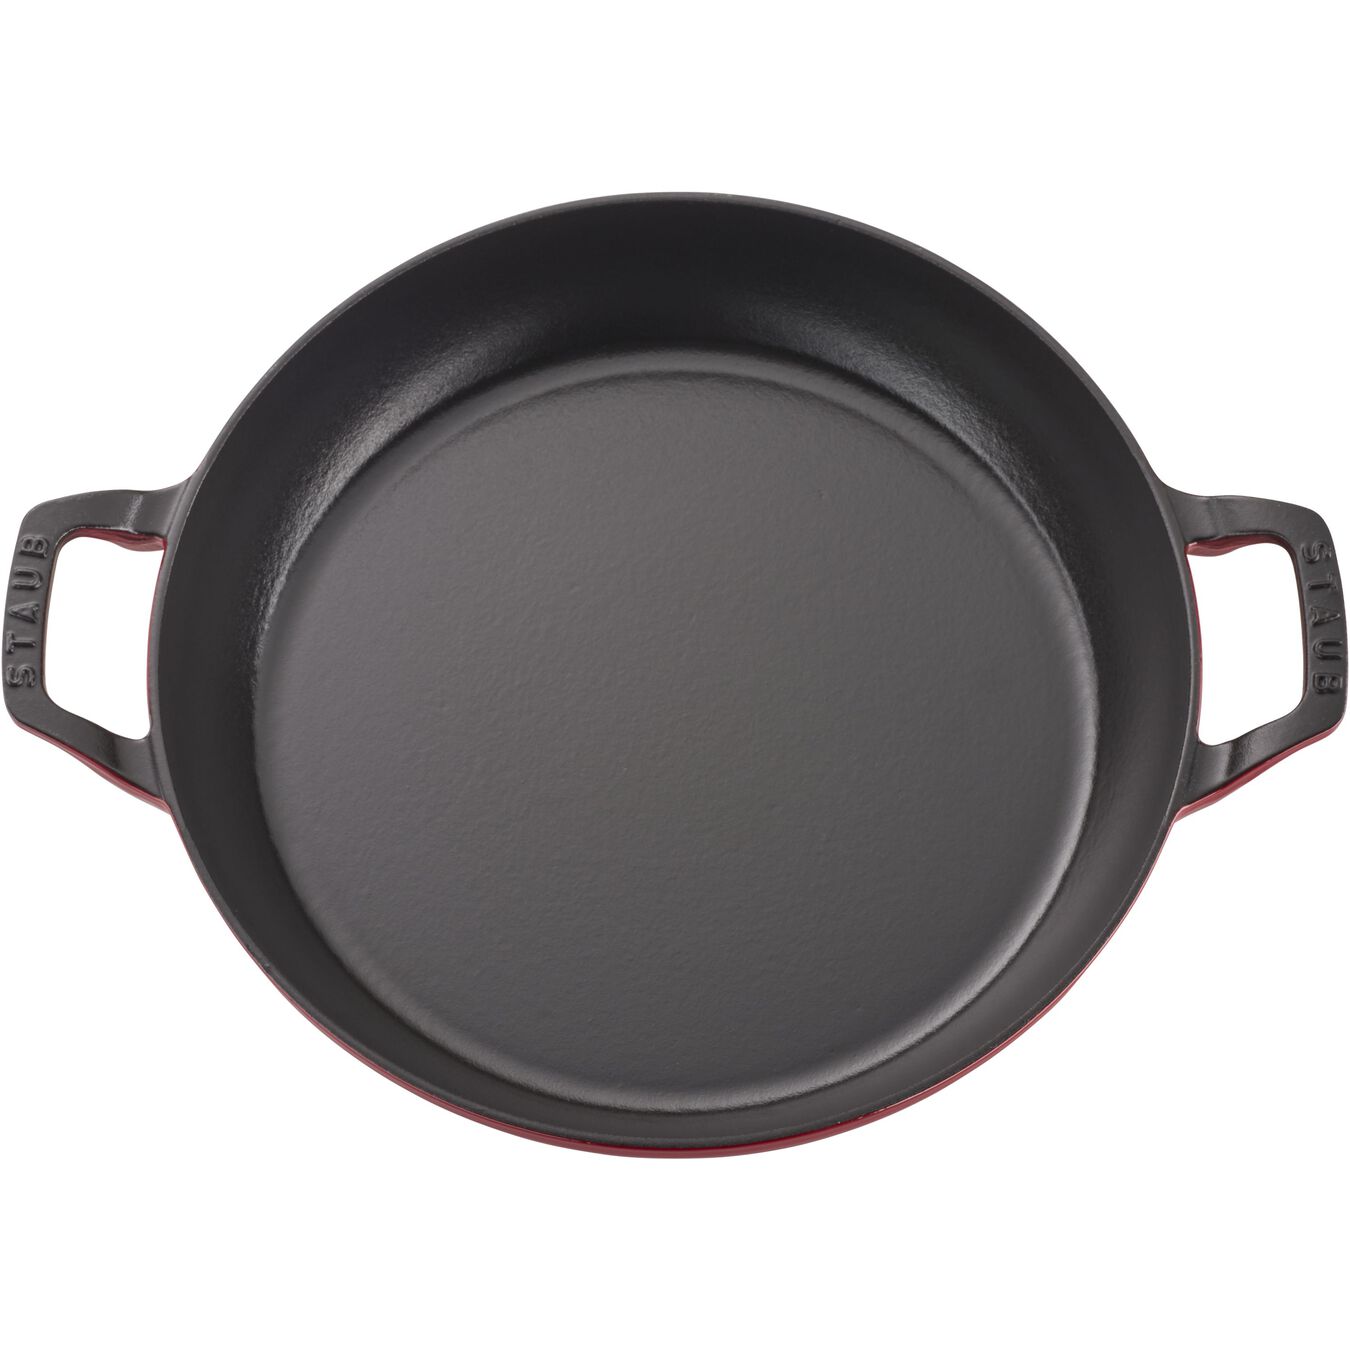 3.5 l cast iron round Saute pan with glass lid, cherry - Visual Imperfections,,large 2